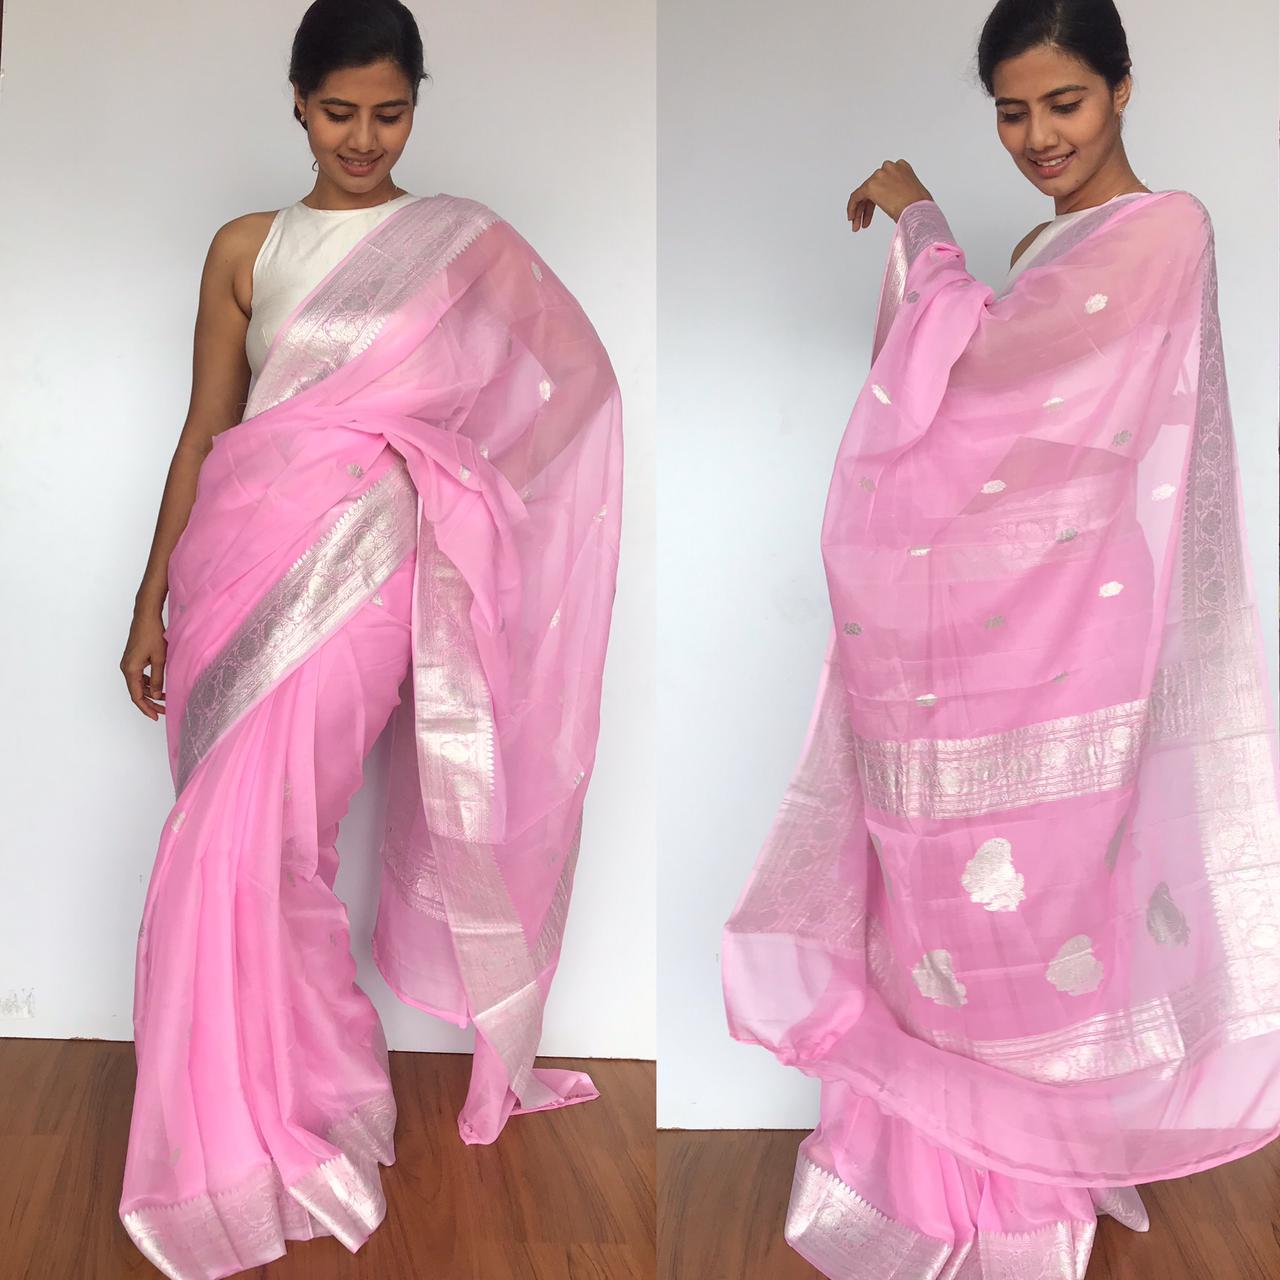 Learn About the Different Types of Saree Fabrics – ONE MINUTE SAREE